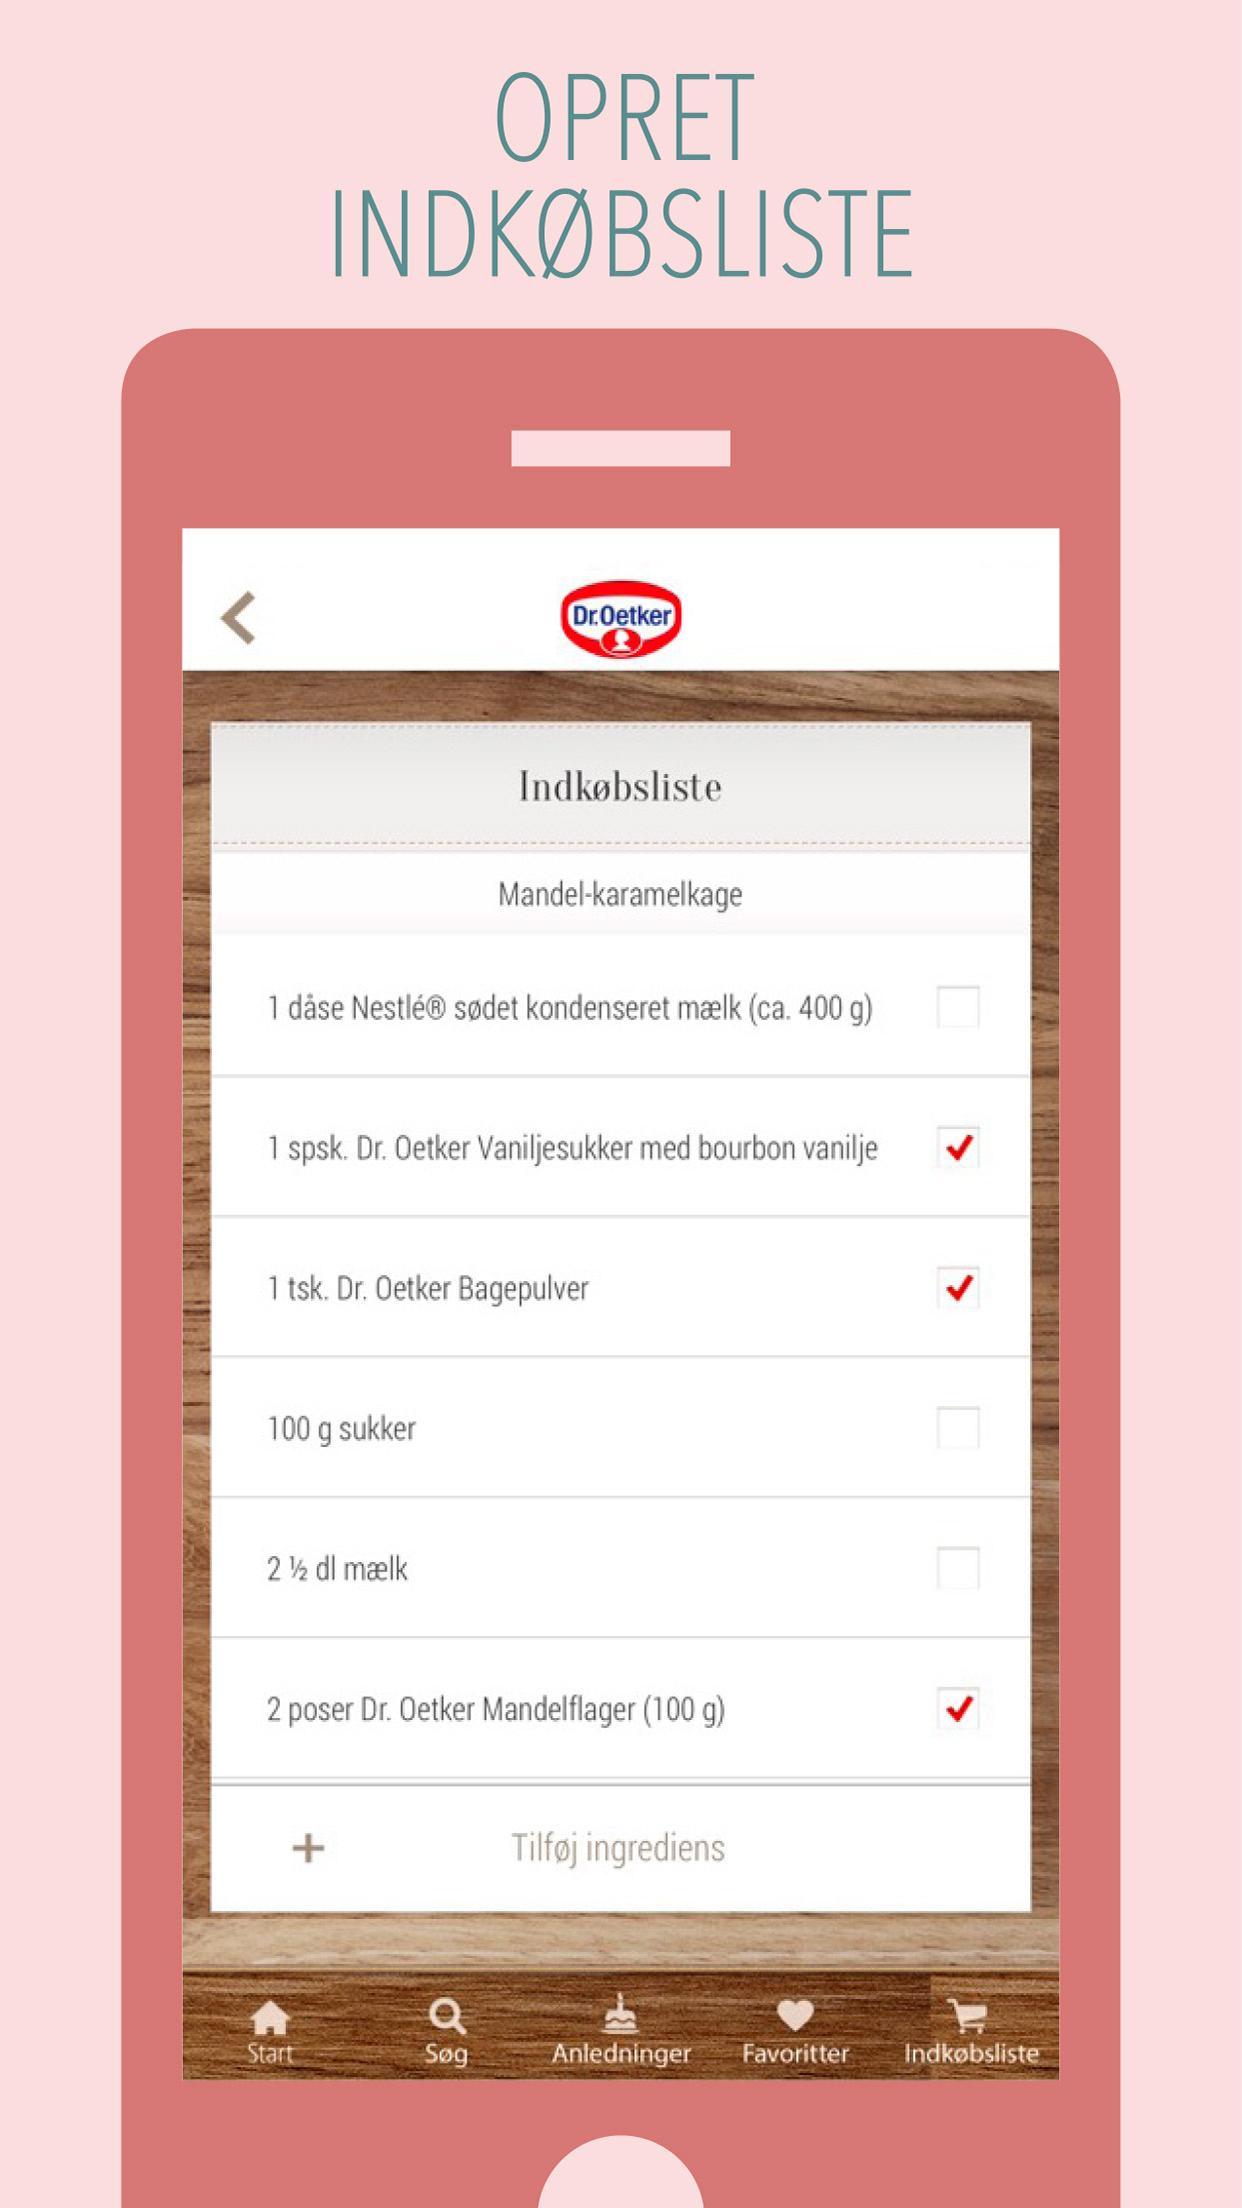 Kagerullen for Android - APK Download